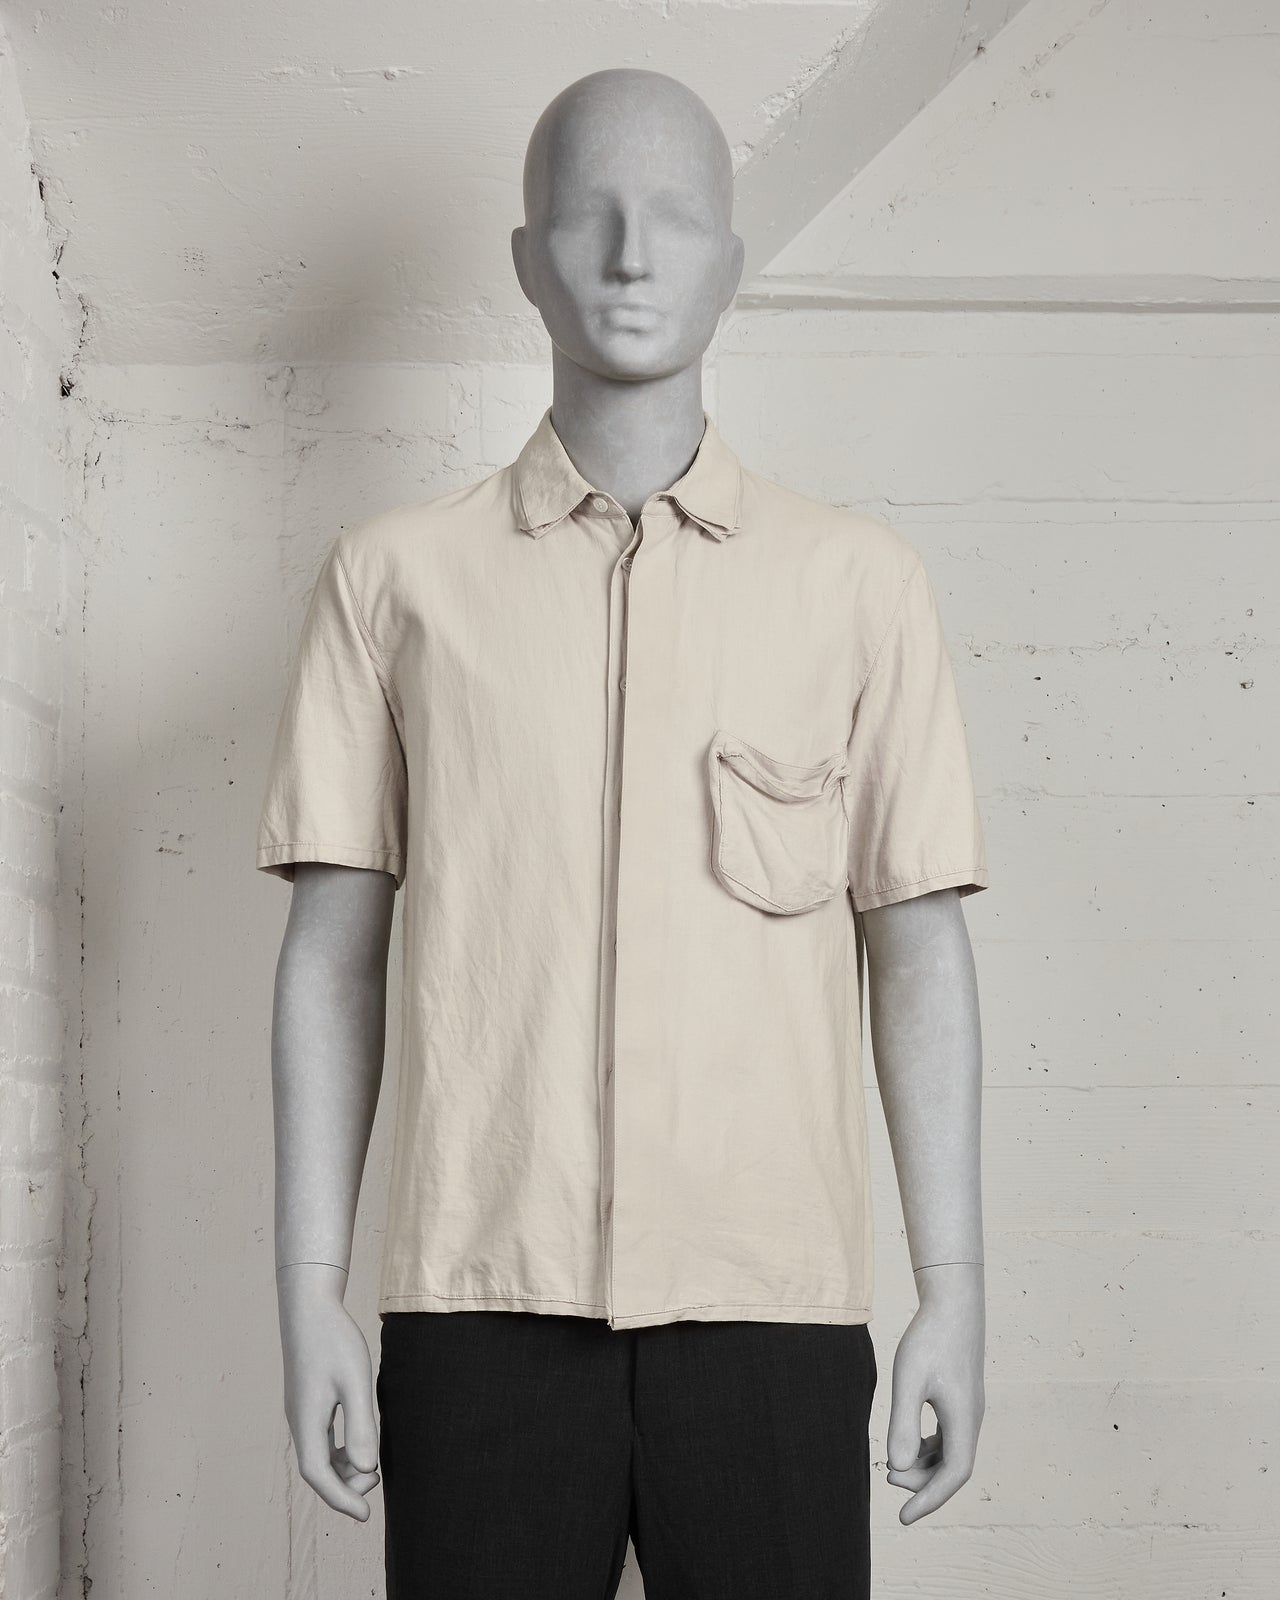 Hussein Chalayan 3-D Short-Sleeve Shirt - AW03 "Place / Non-Place"